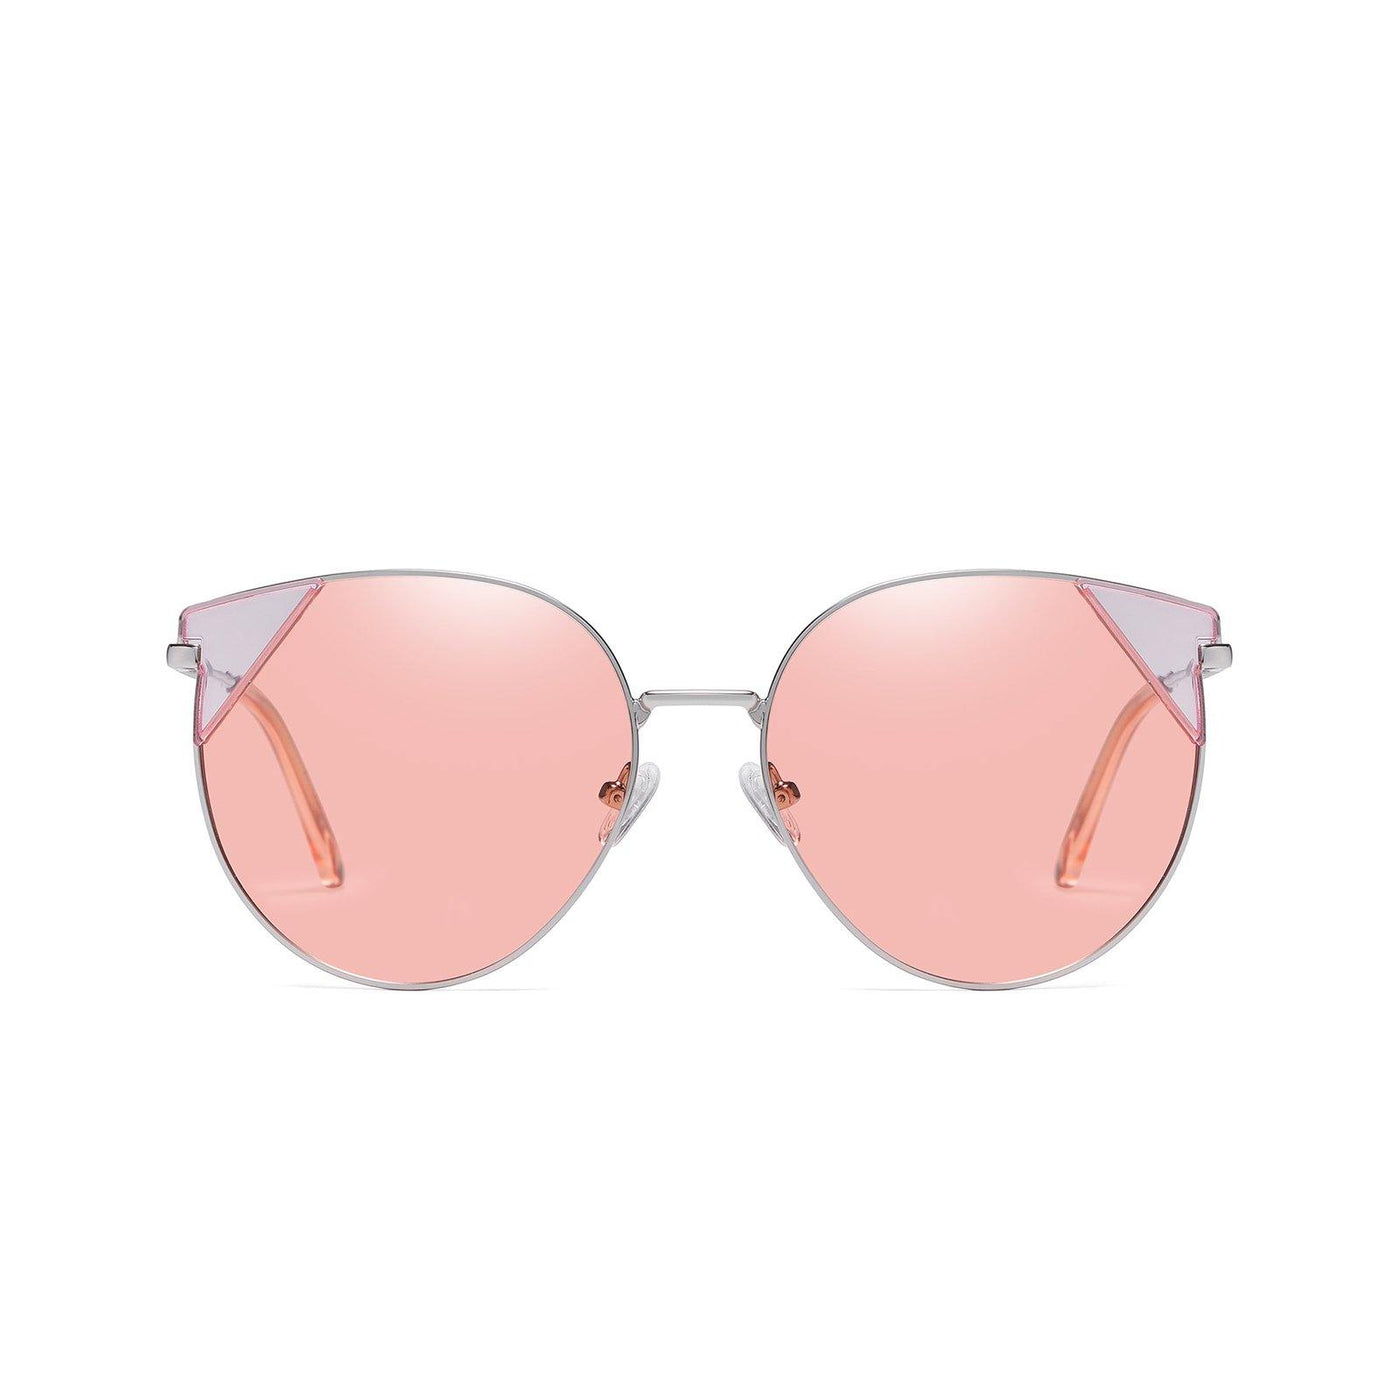 DUCO GLASSES-The right kind of shady Duco Vintage Classic designer sunglasses for women with Round Metal Frame & UV400 Duco Women